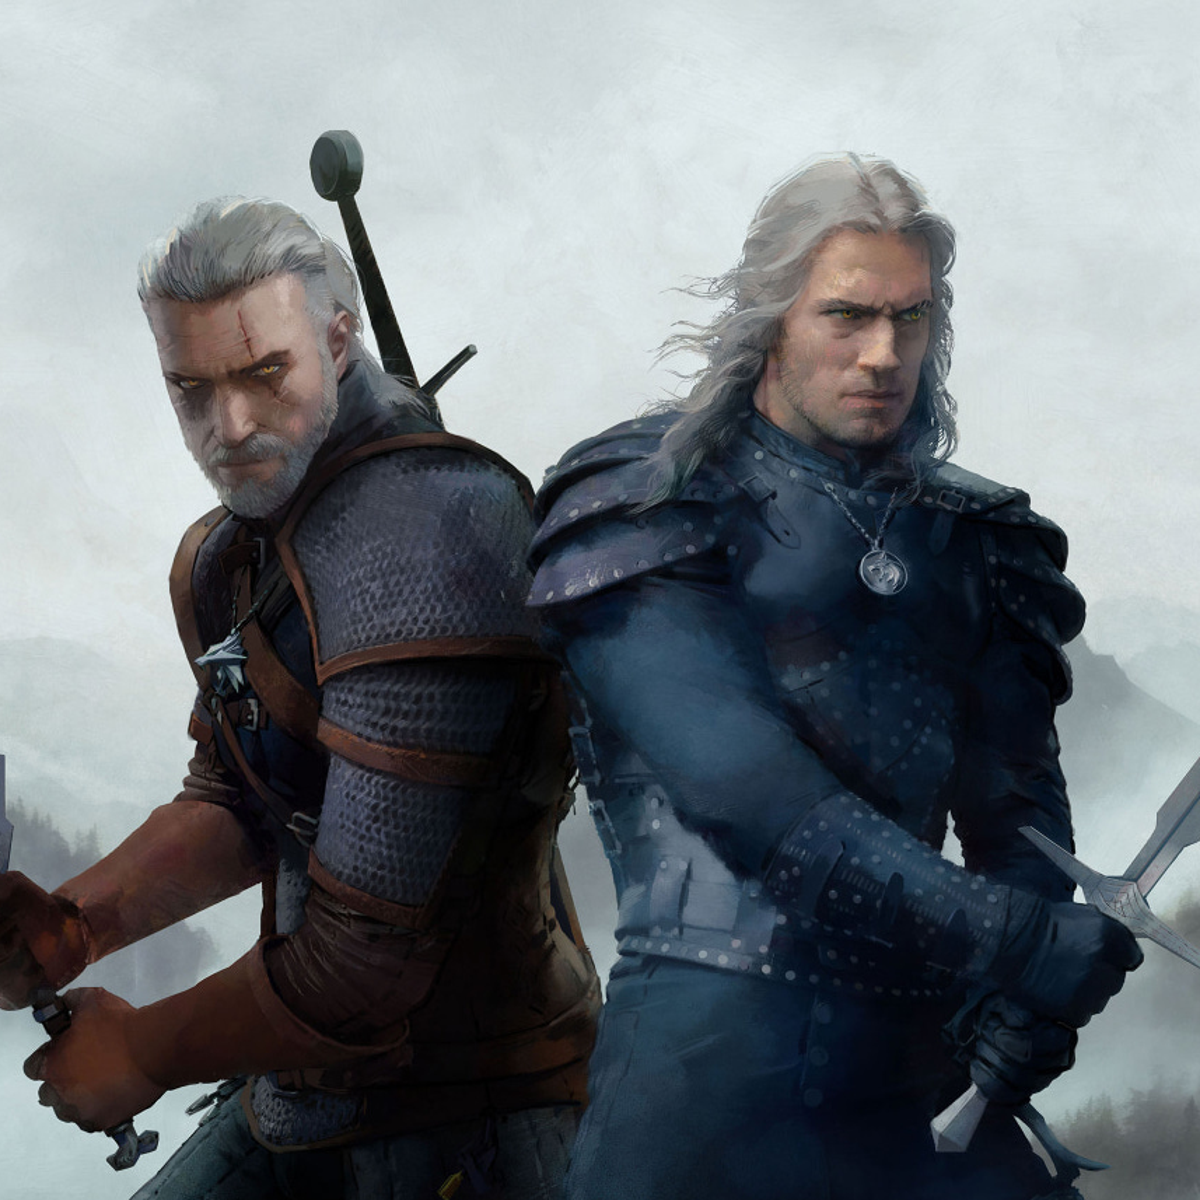 The Witcher 3 is getting free DLC inspired by the tv show